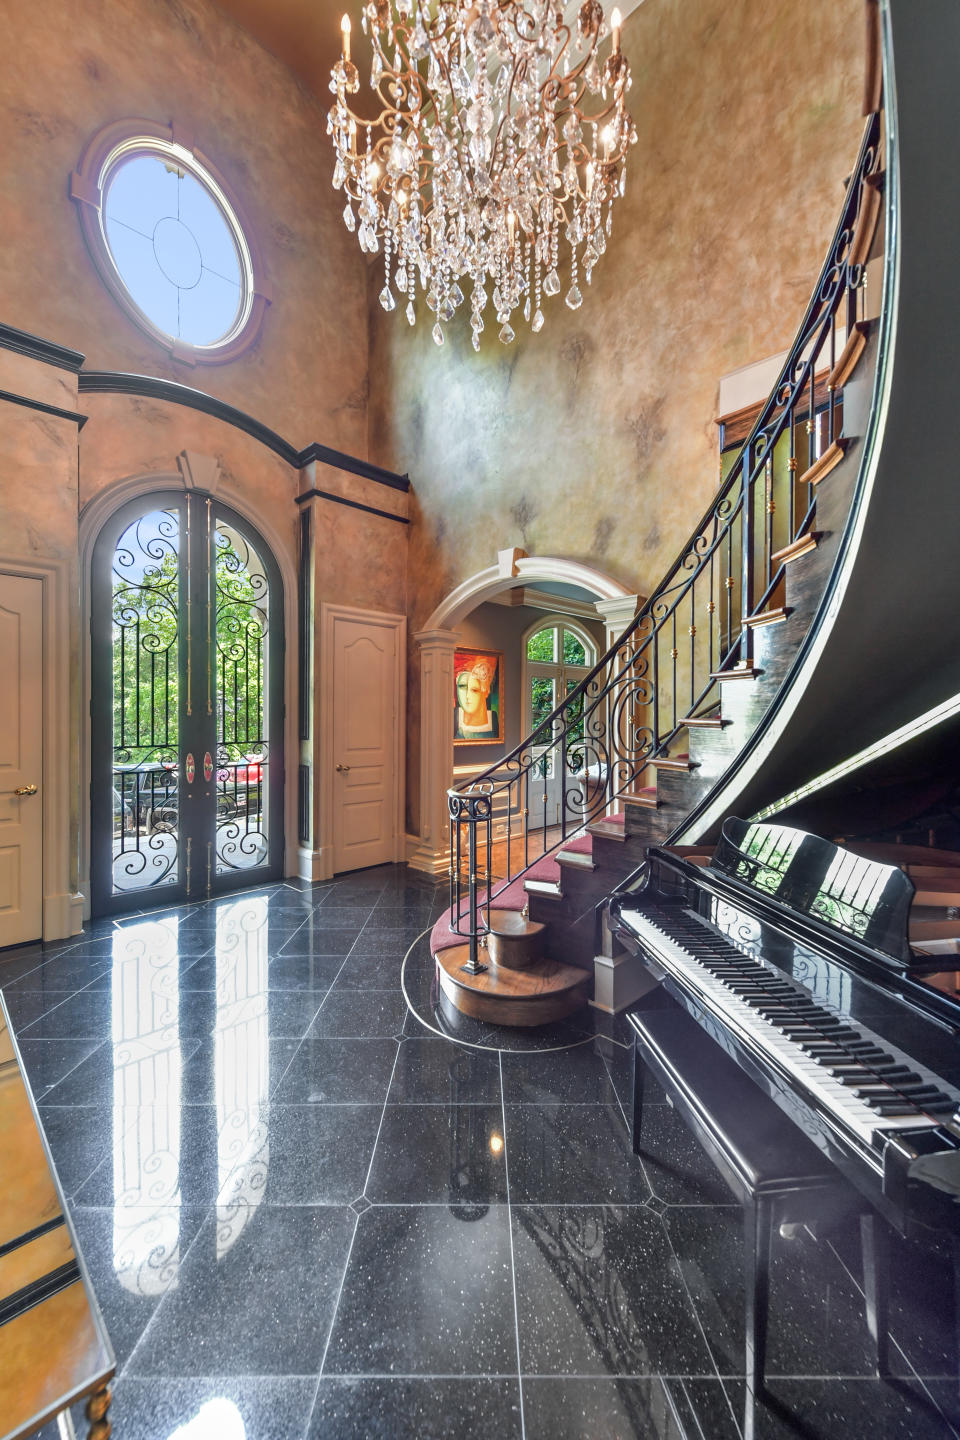 The entryway of the nearly 7,000-square-foot home opens into a sweeping staircase. (Photo credit: Josh Vick, HomeTour America)